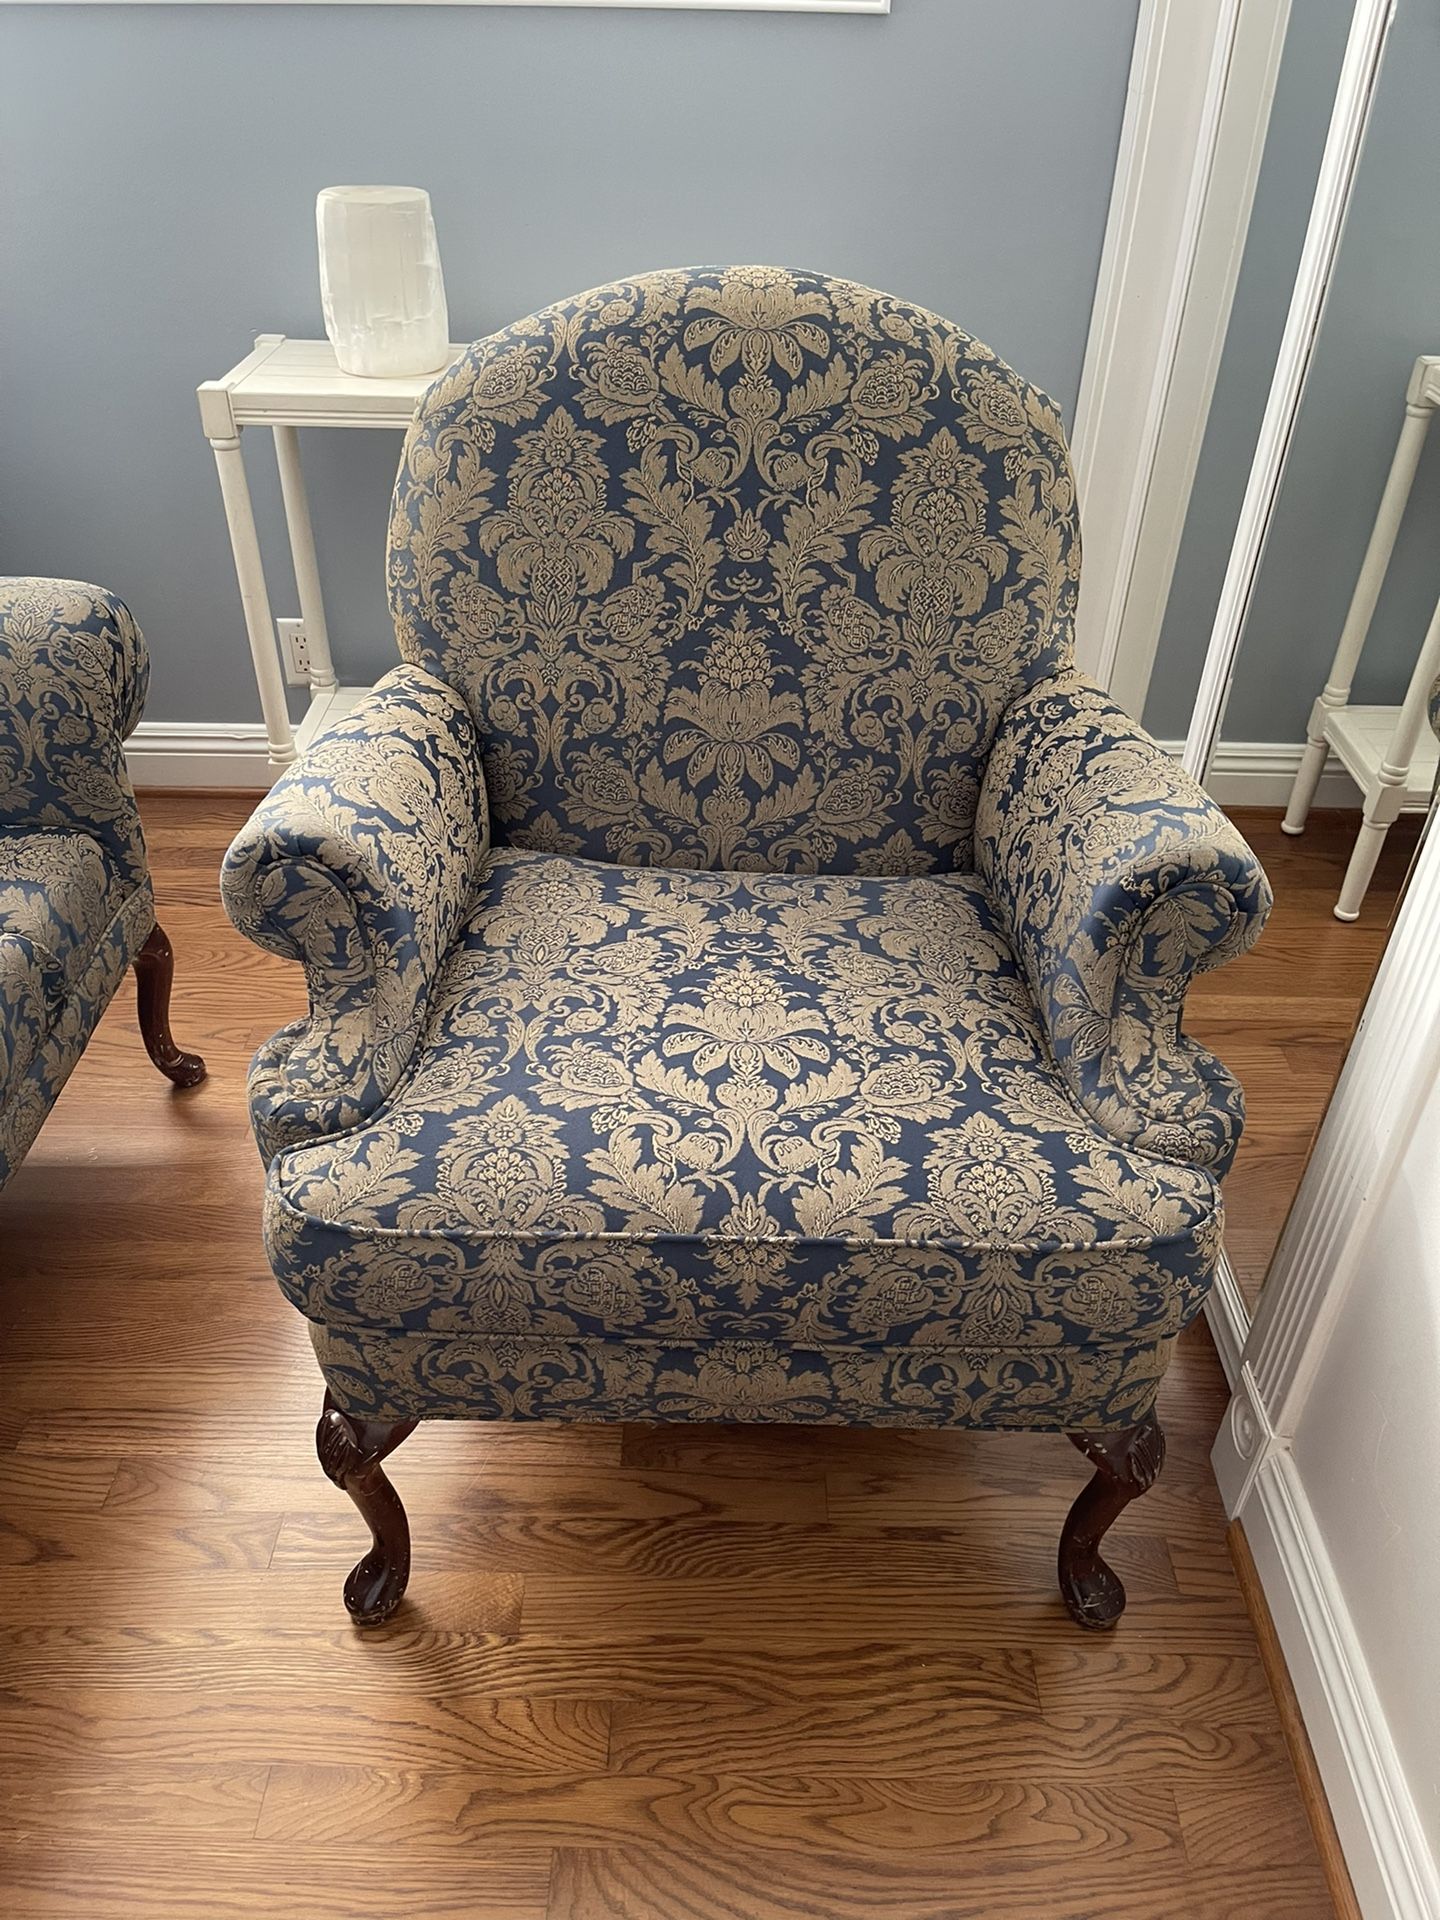 King Hickory Arm Chair With Mahogany Wood Legs 